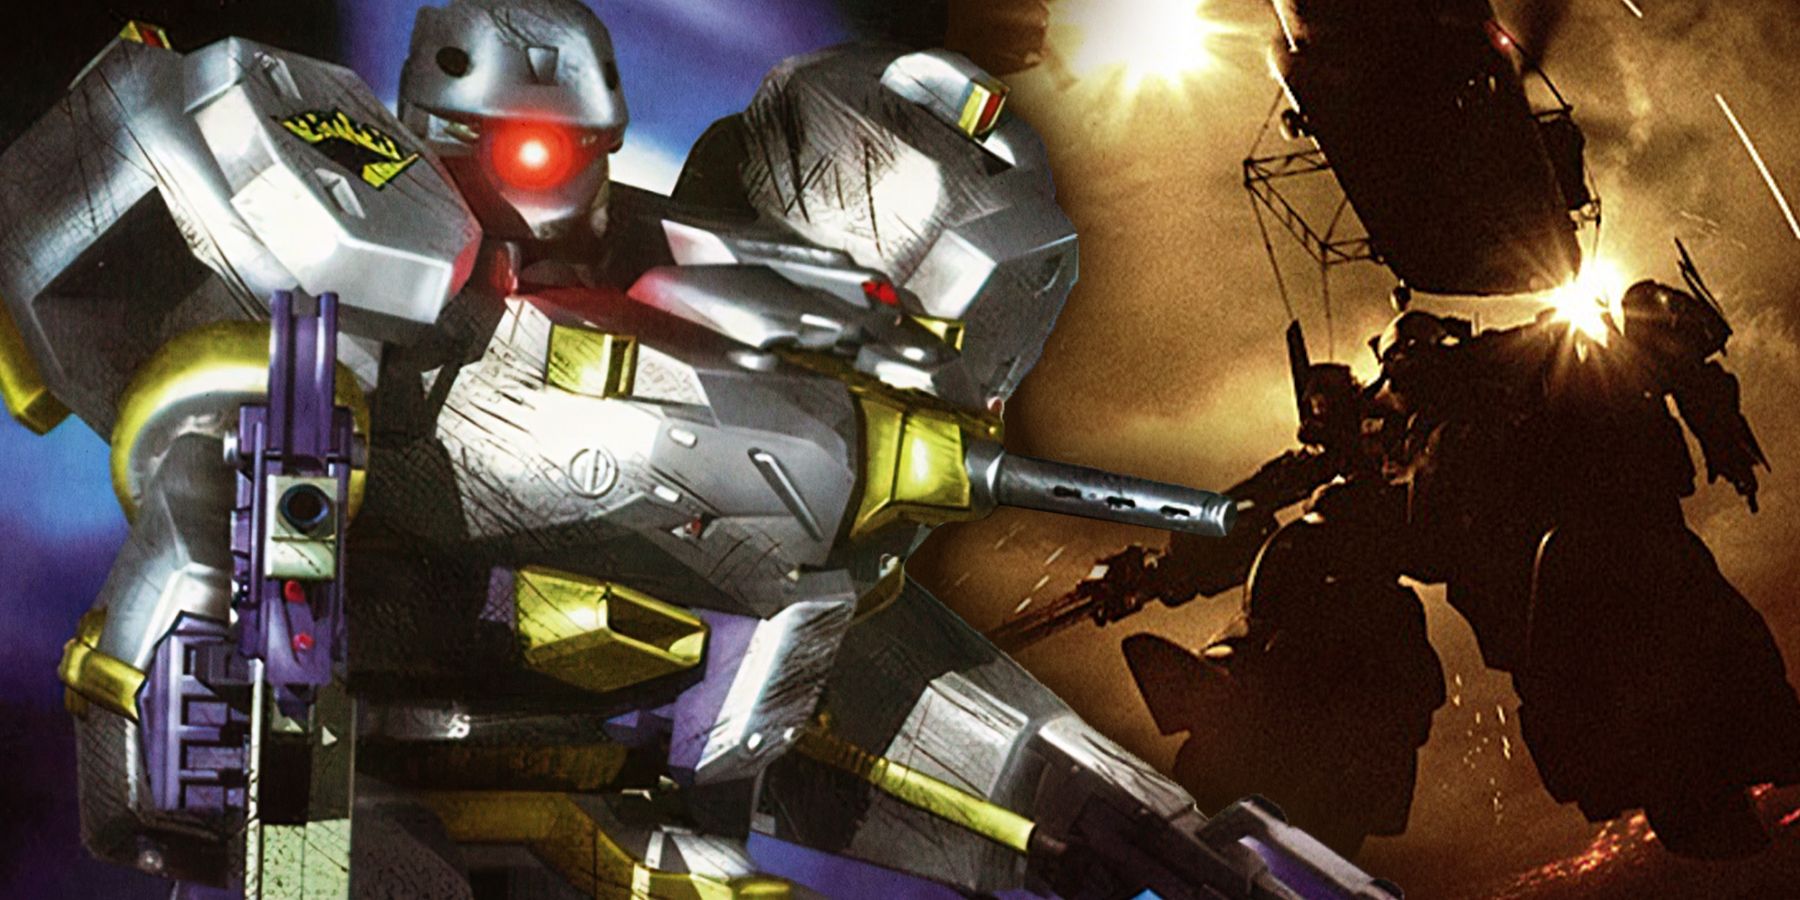 Twenty Years Ago 'Armored Core' Changed The World Of Mecha Gaming Forever